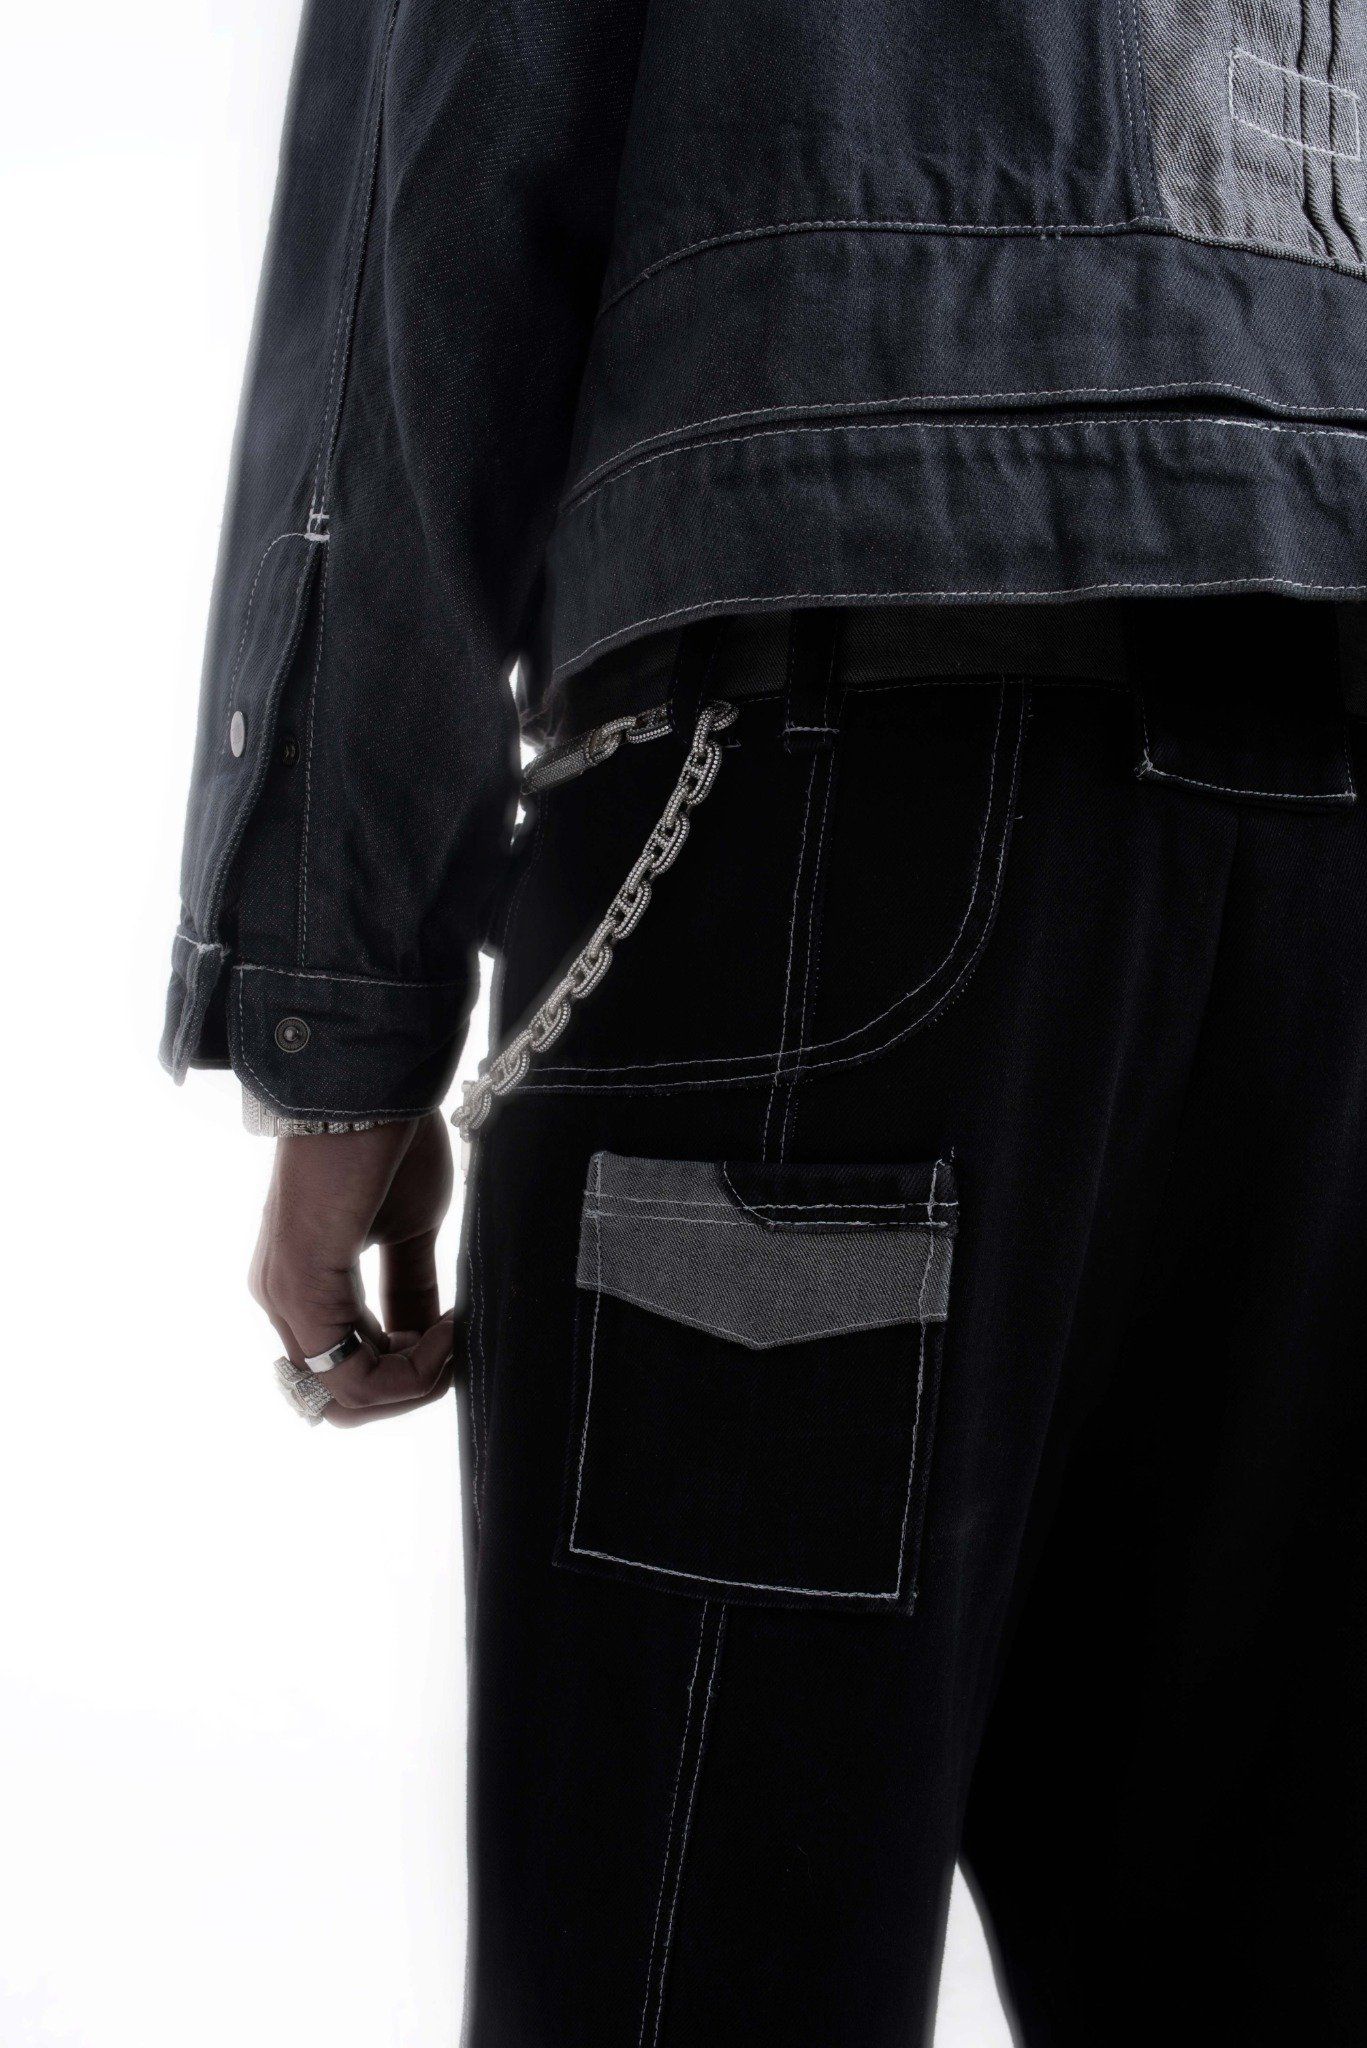  [ Cement Denim Jacket / Trouser ] - Limited Edition (1 Of 1) 